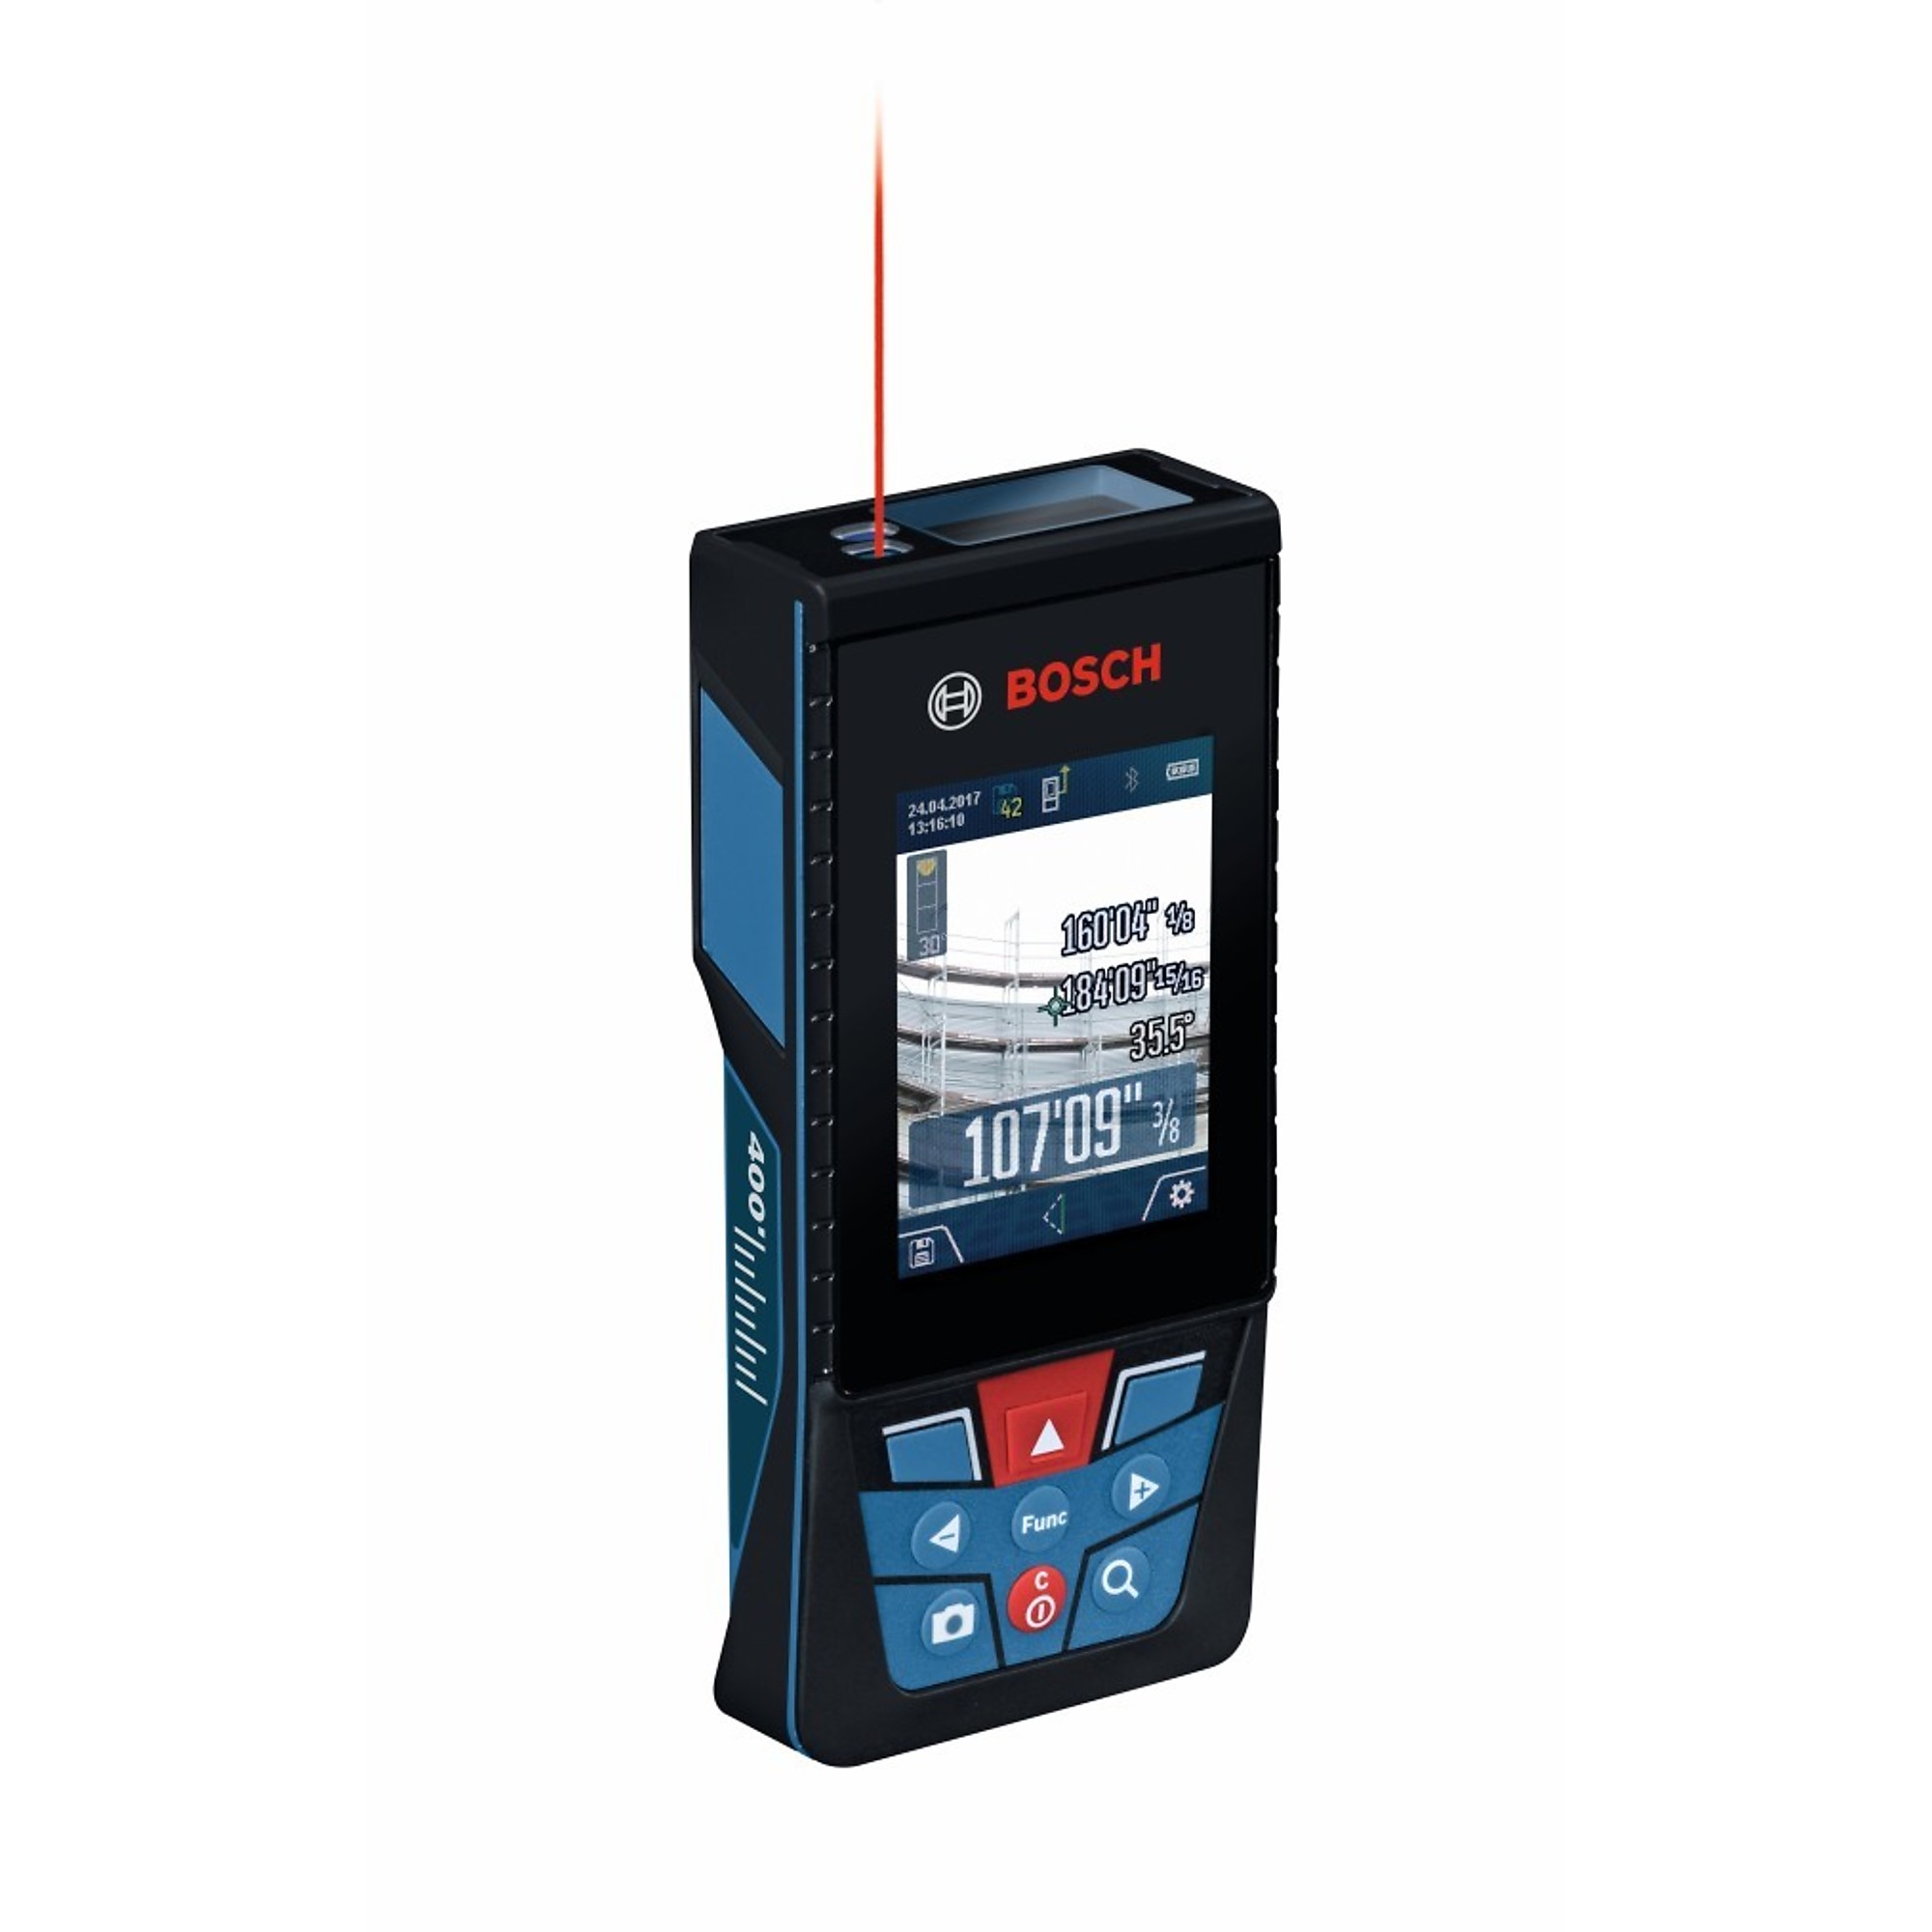 Bosch, BLAZE Outdoor 400ft. Lithium Laser Measure Camera, Max. Measuring Distance 400 ft, Accuracy 0.06 in, Model GLM400CL